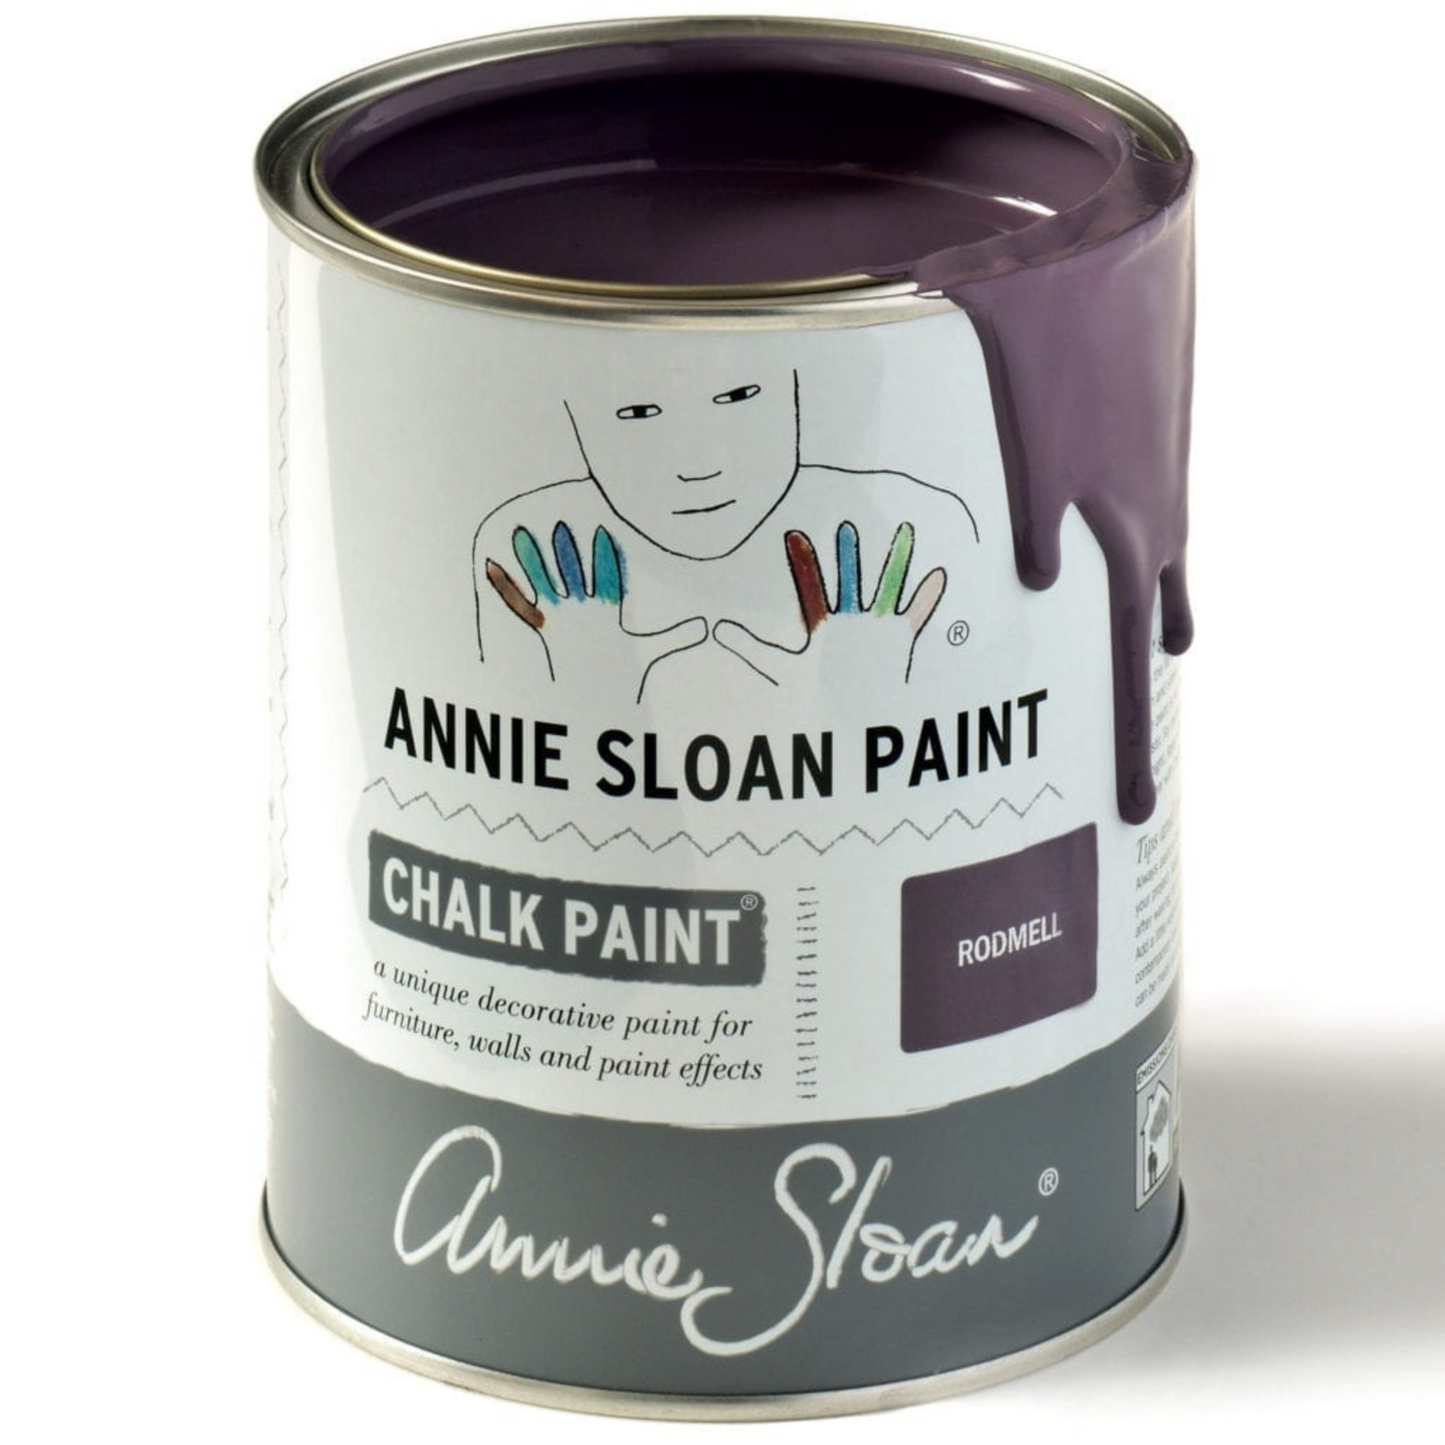 Can of Rodmell Annie Sloan Chalk Paint.